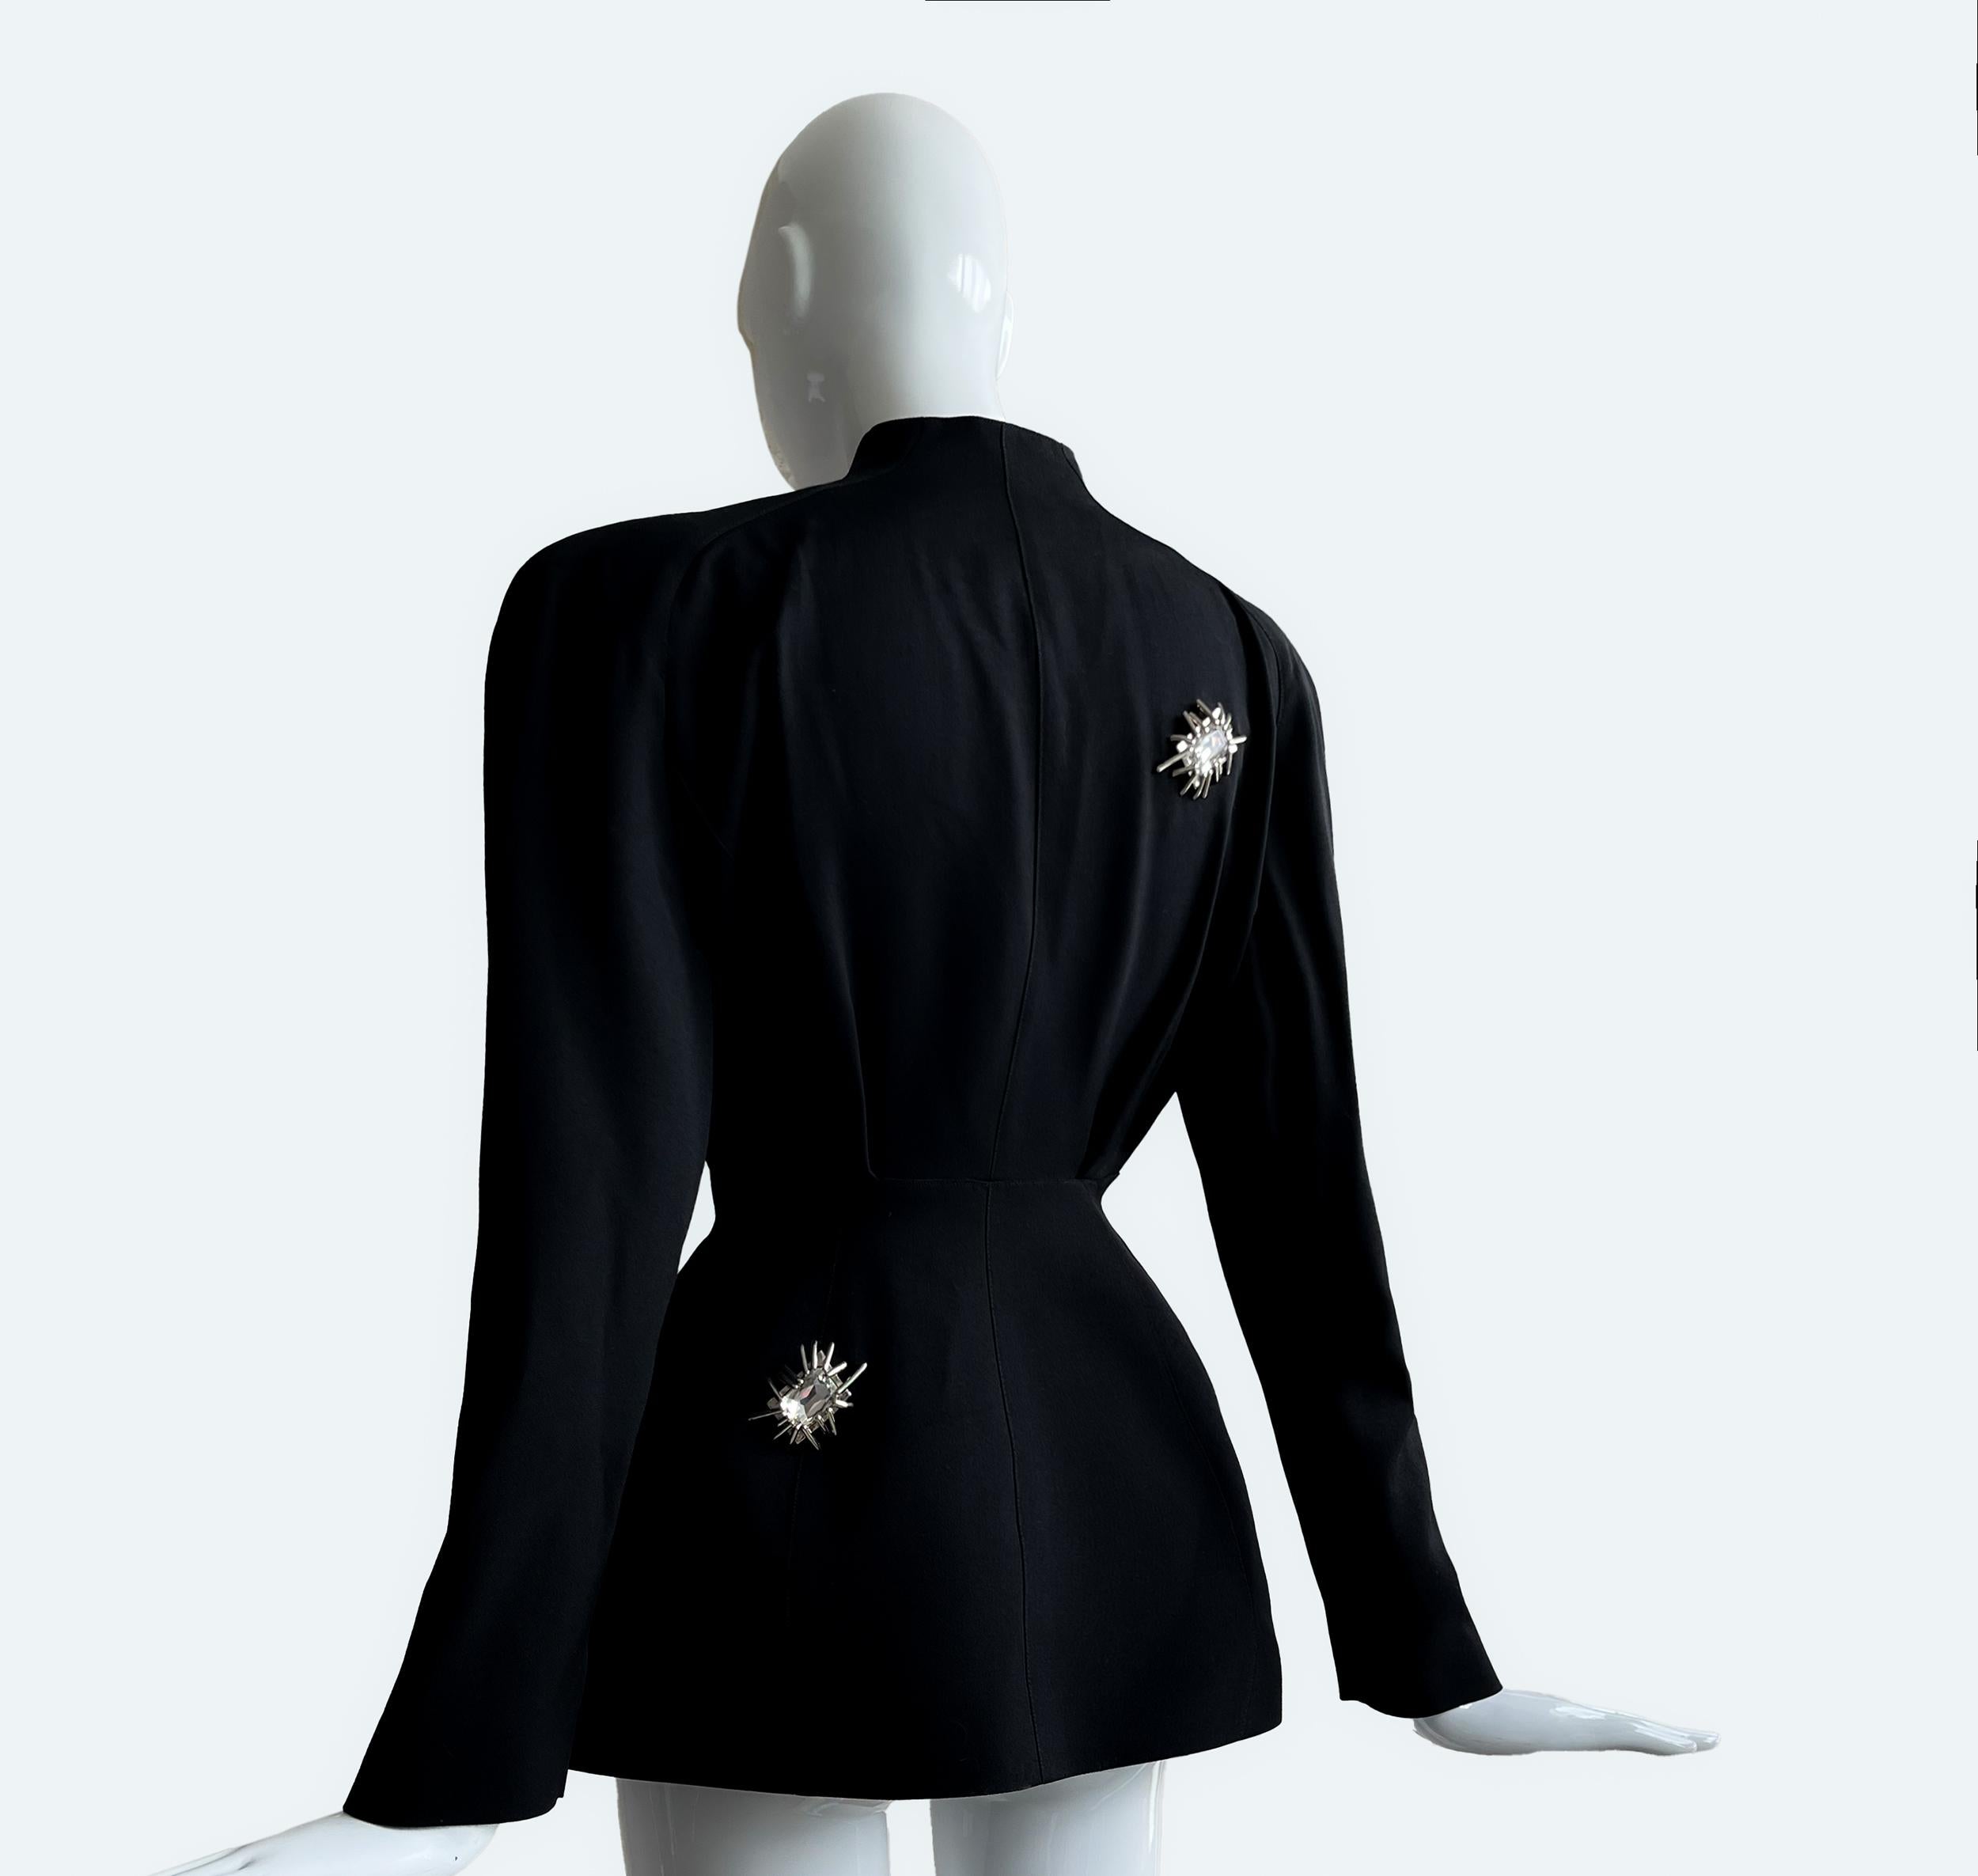 Gorgeous Thierry Mugler Jacket Diamond Jewel Rare Dramatic Black Jacket In Good Condition For Sale In Berlin, BE